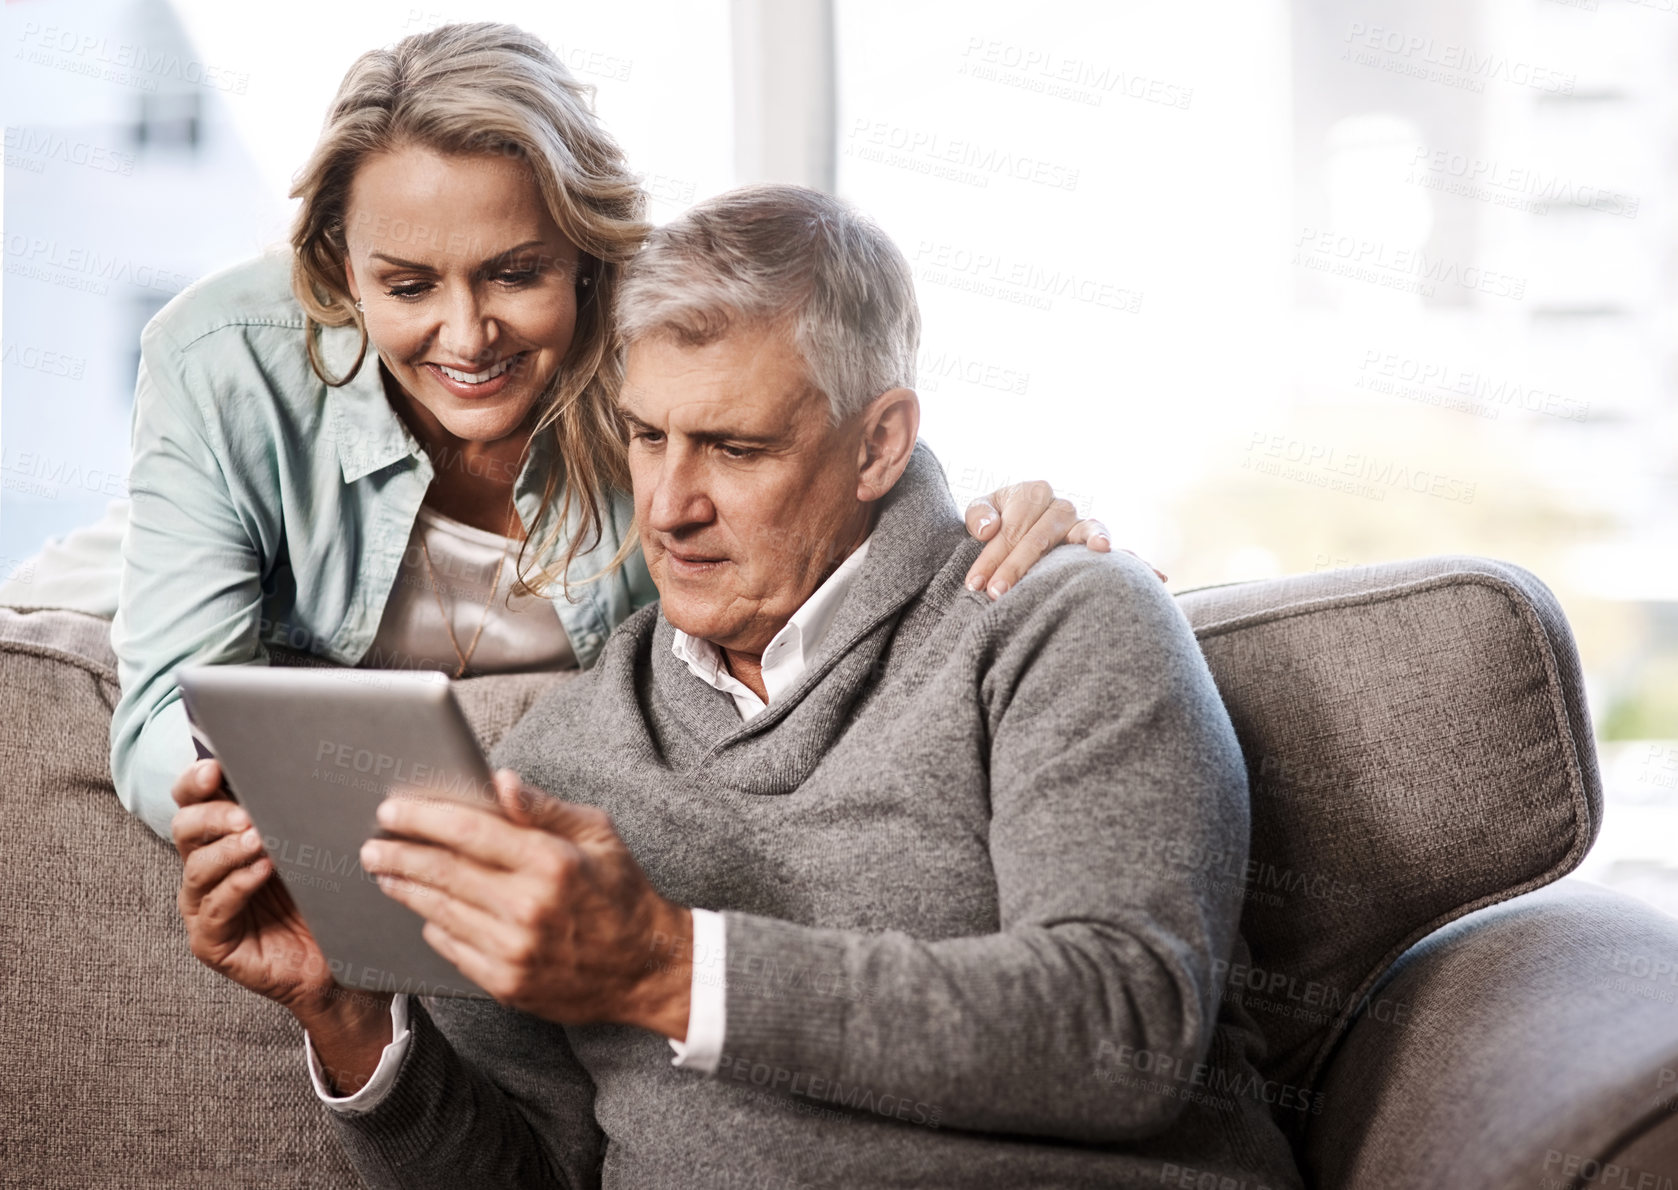 Buy stock photo Shot of a mature couple using a digital tablet and credit card to do online shopping at home